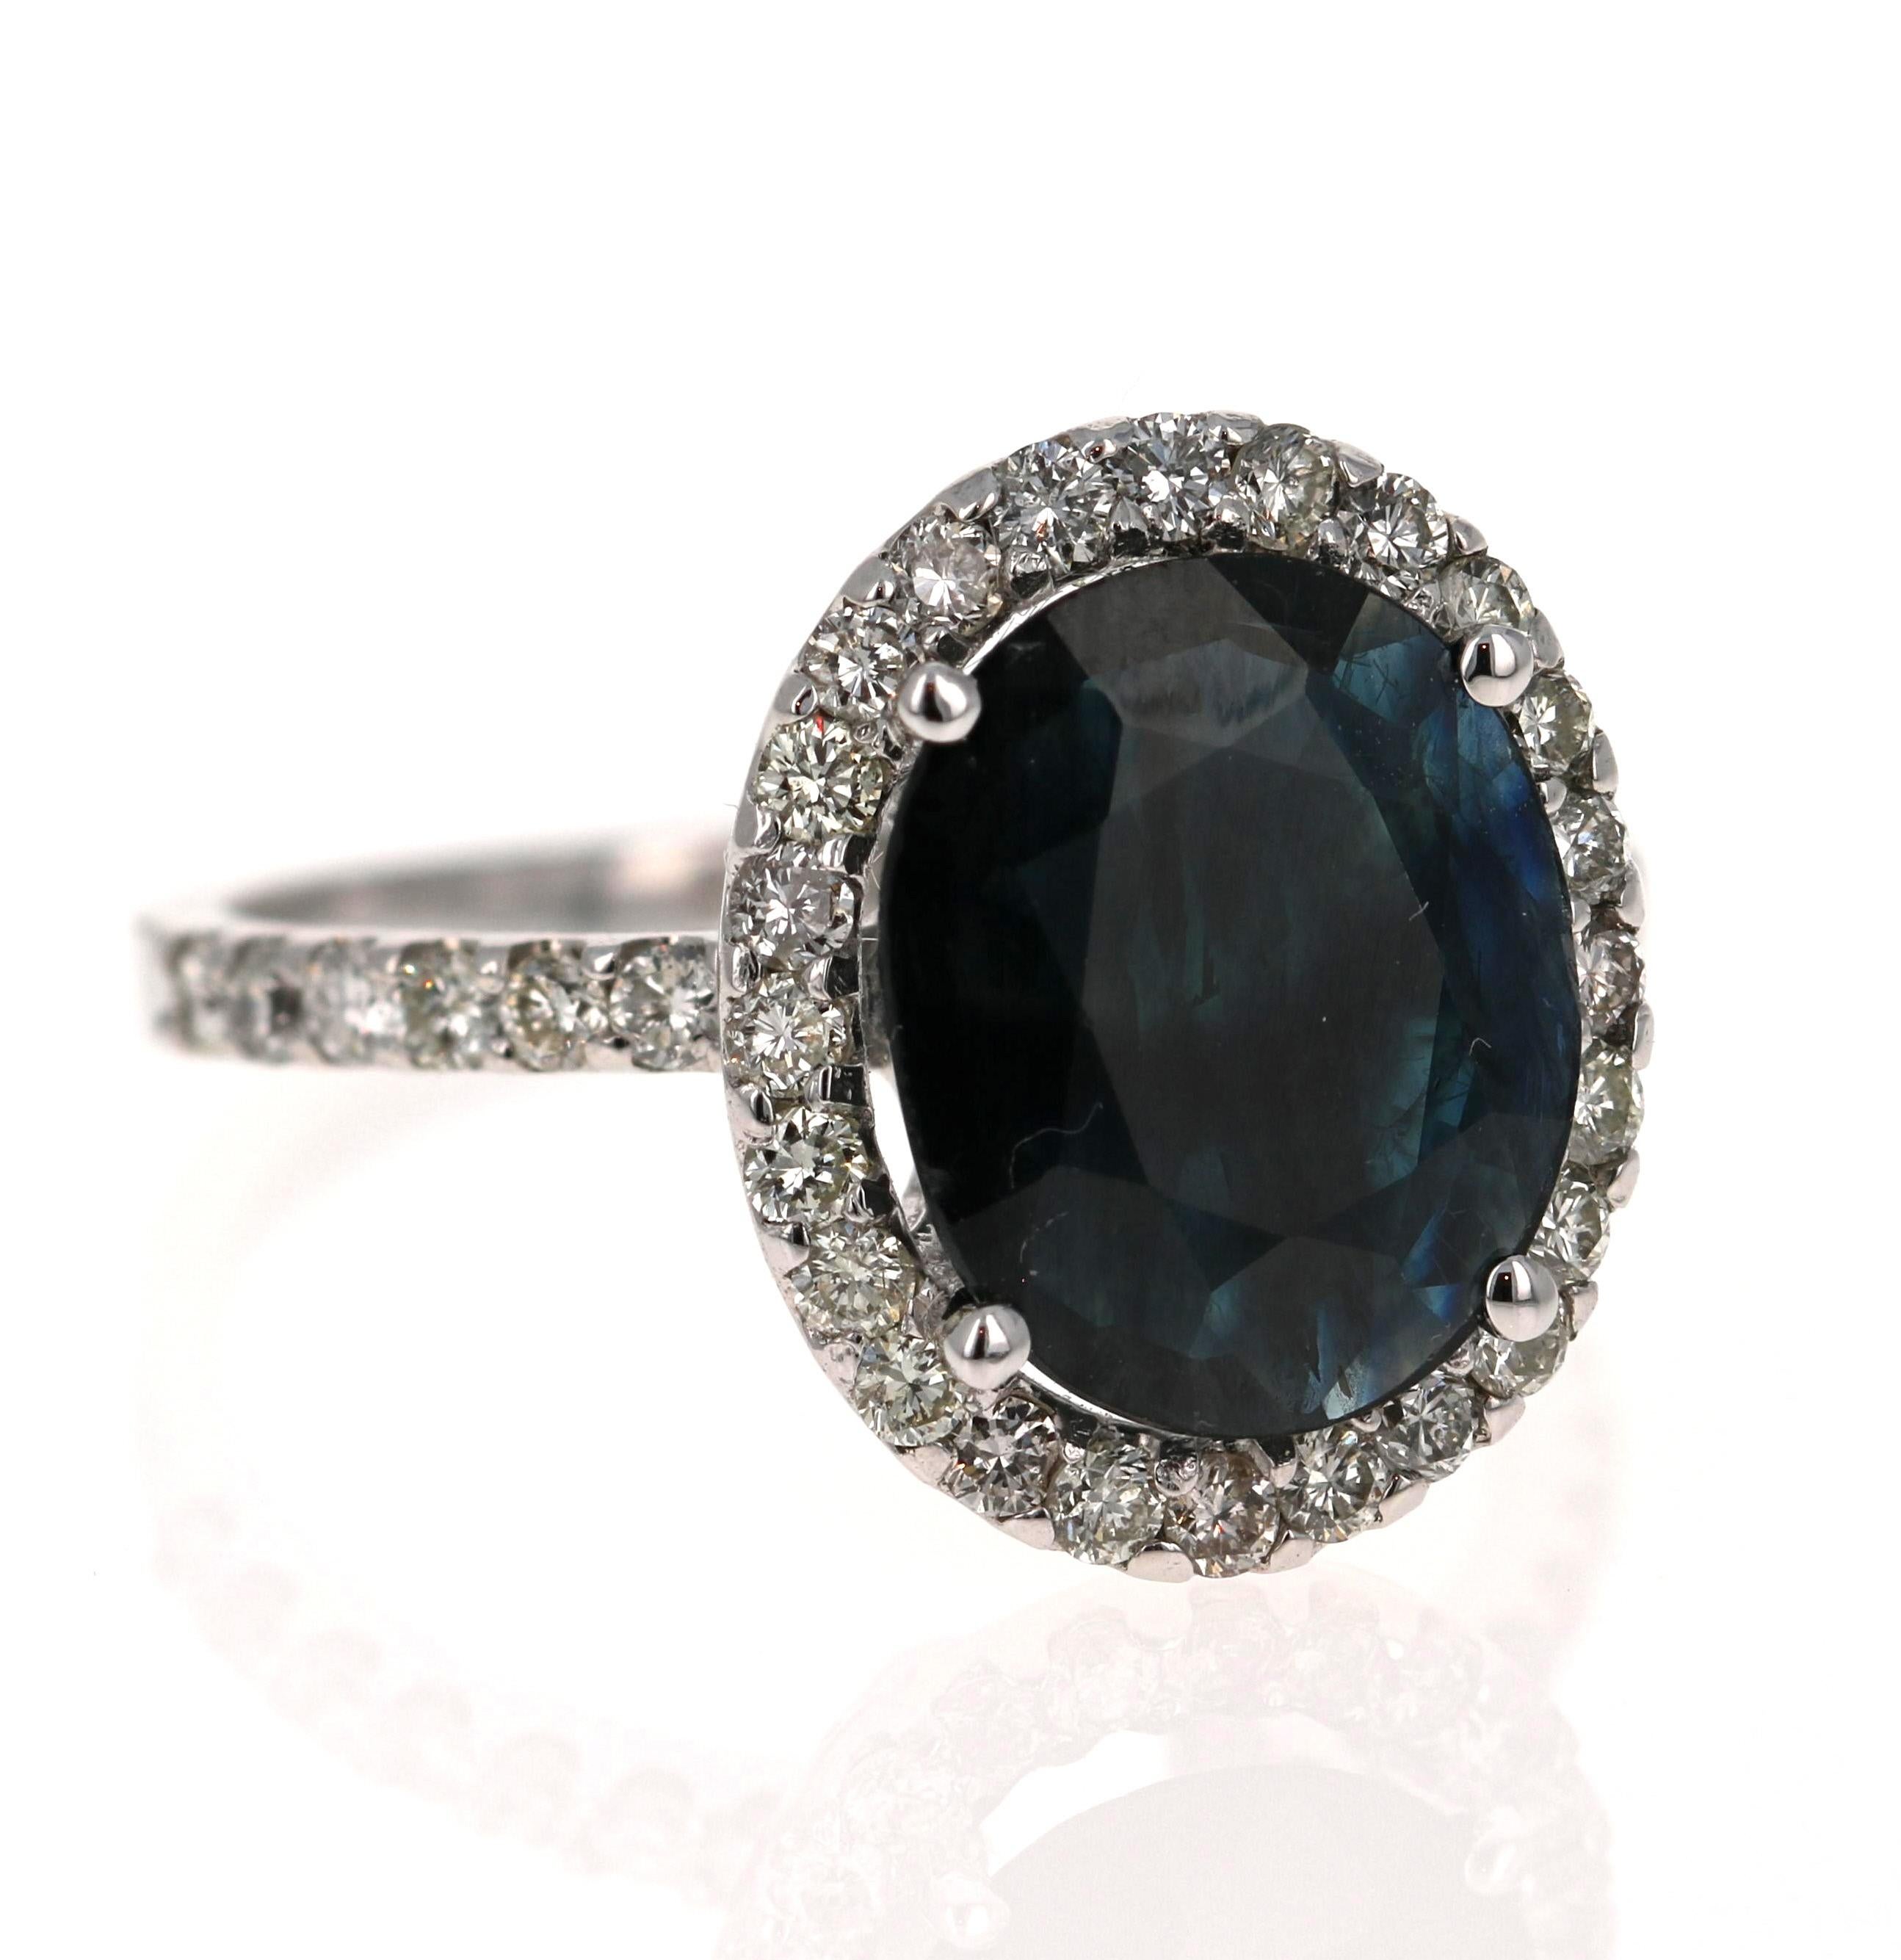 Gorgeous 3.72 Carat Sapphire and Diamond ring that can easily be worn as a unique Engagement ring!  

The Deep Midnight Blue Oval Cut Sapphire weighs 2.99 Carats and is surrounded by 38 Round Cut Diamonds that weigh 0.73 Carats.  The total carat